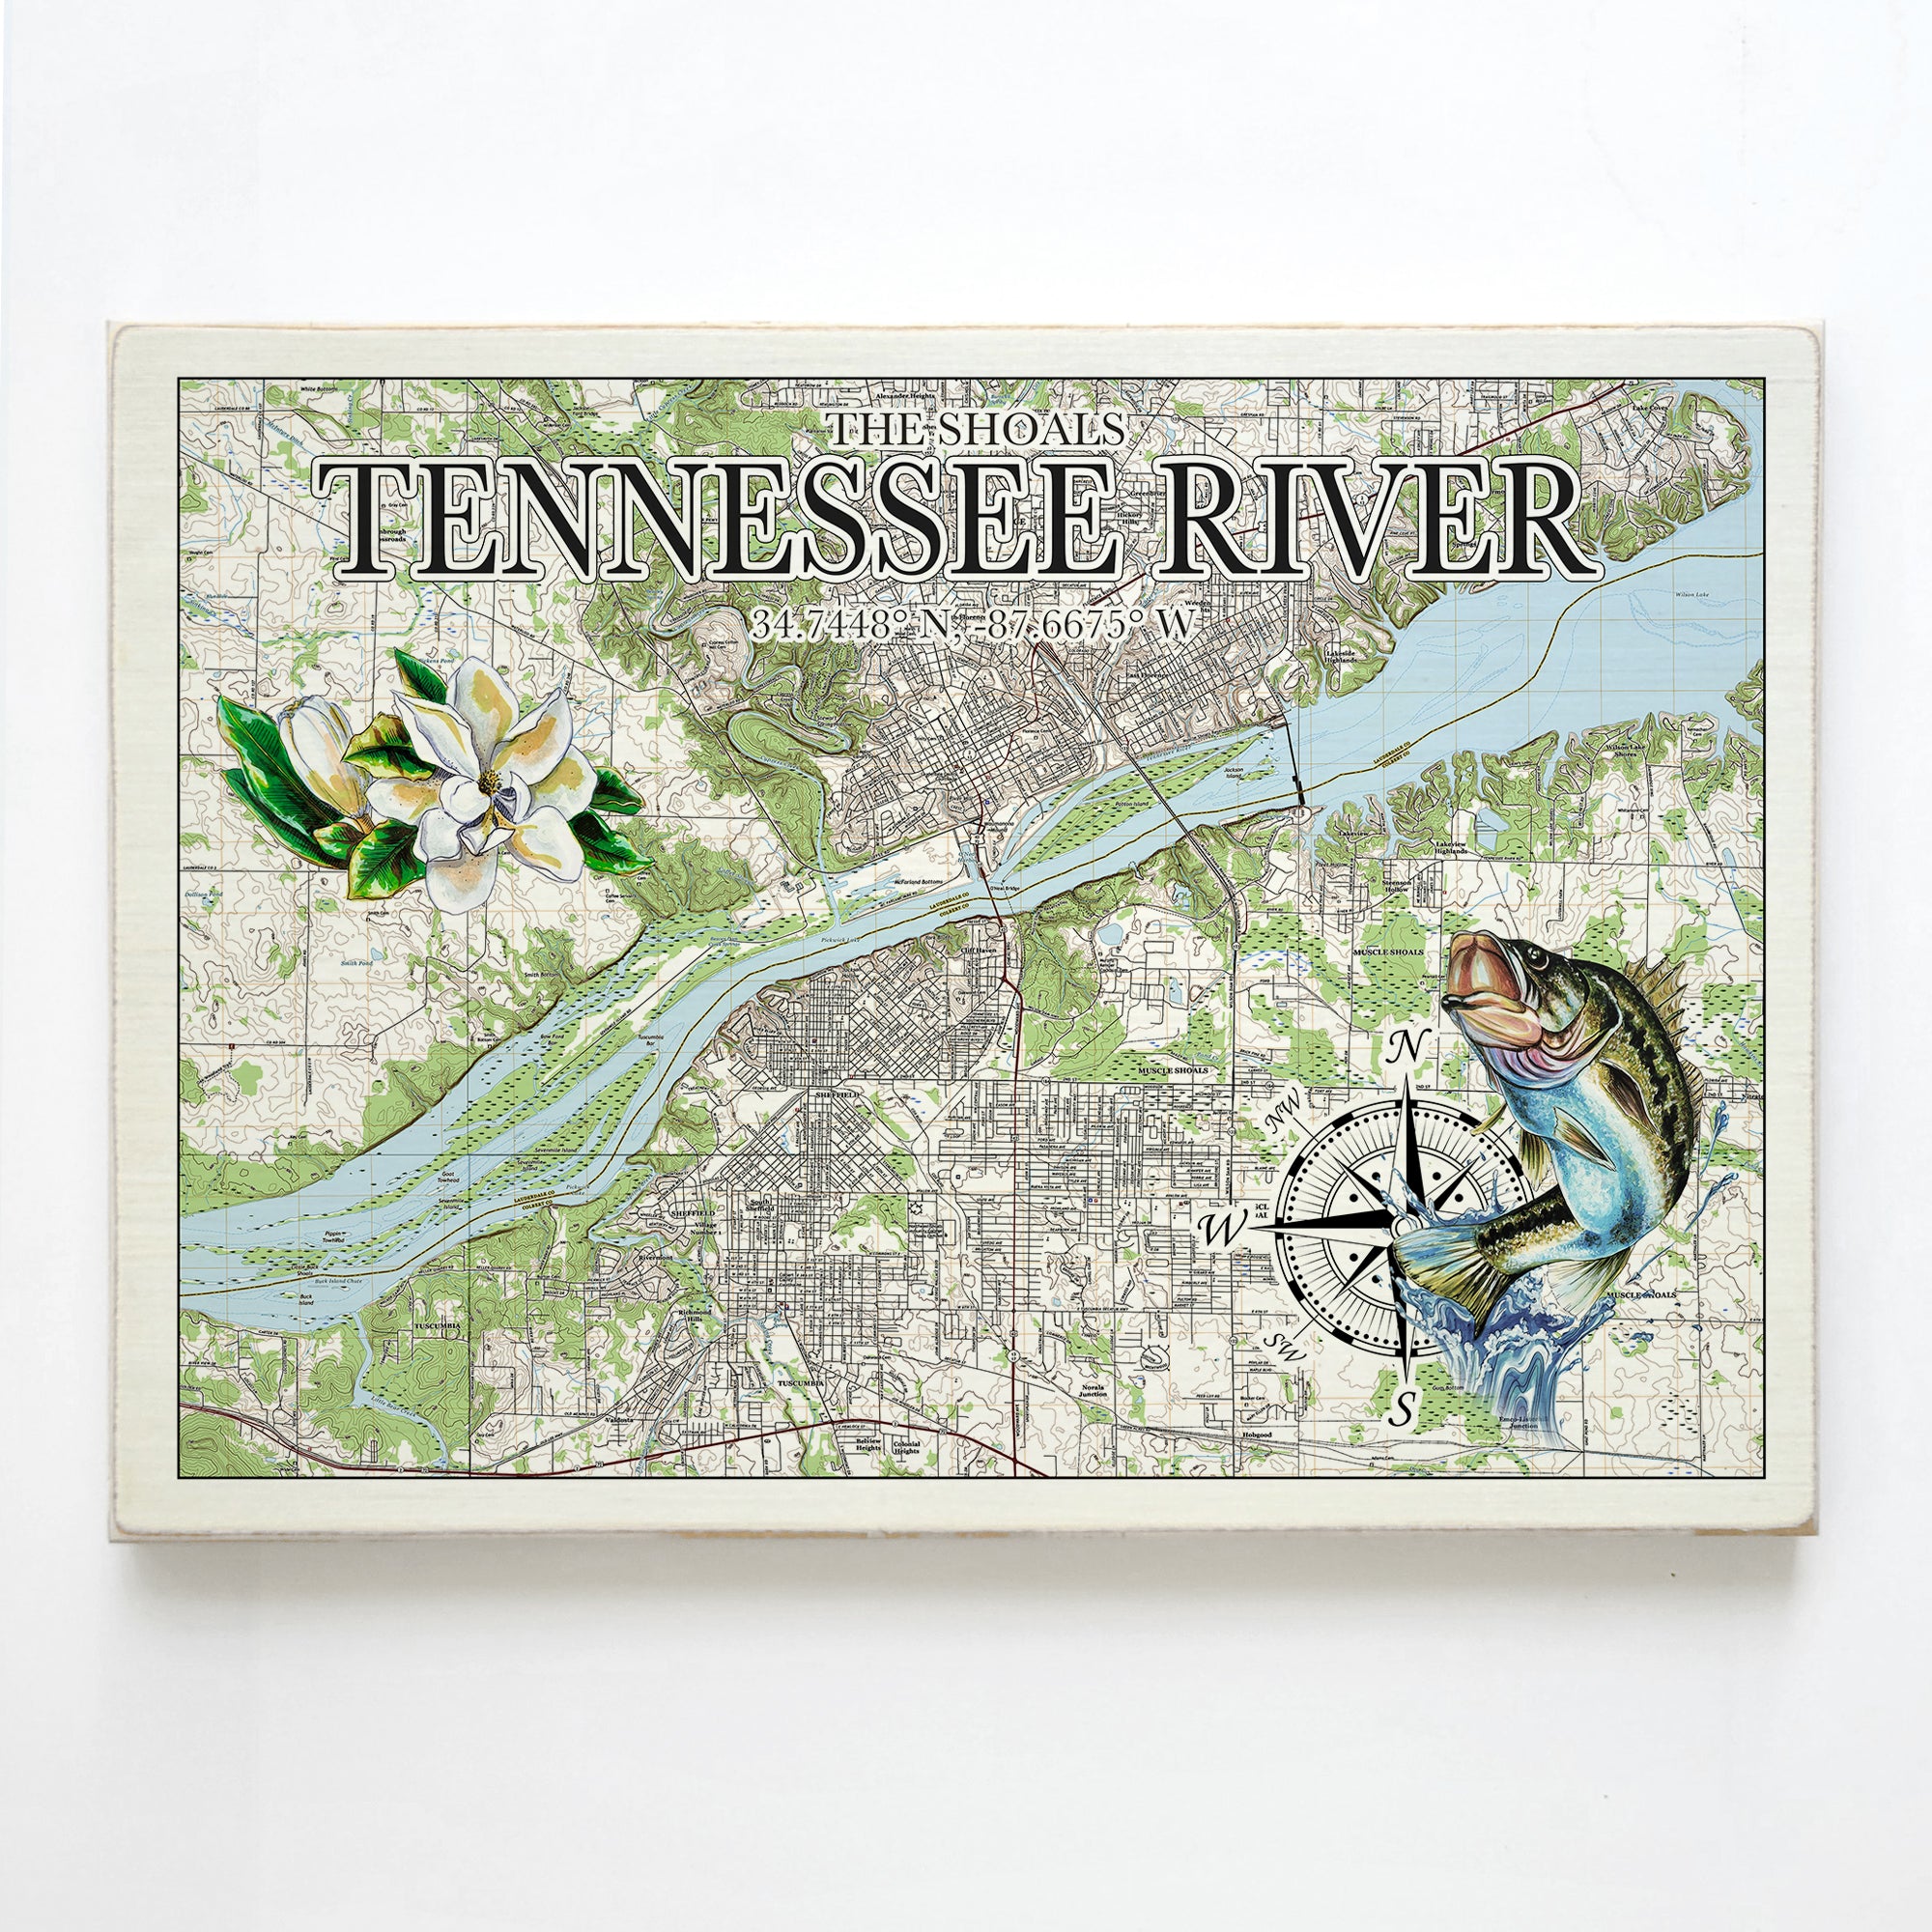 Tennessee River, TN  Magnolia Bass Plank Map